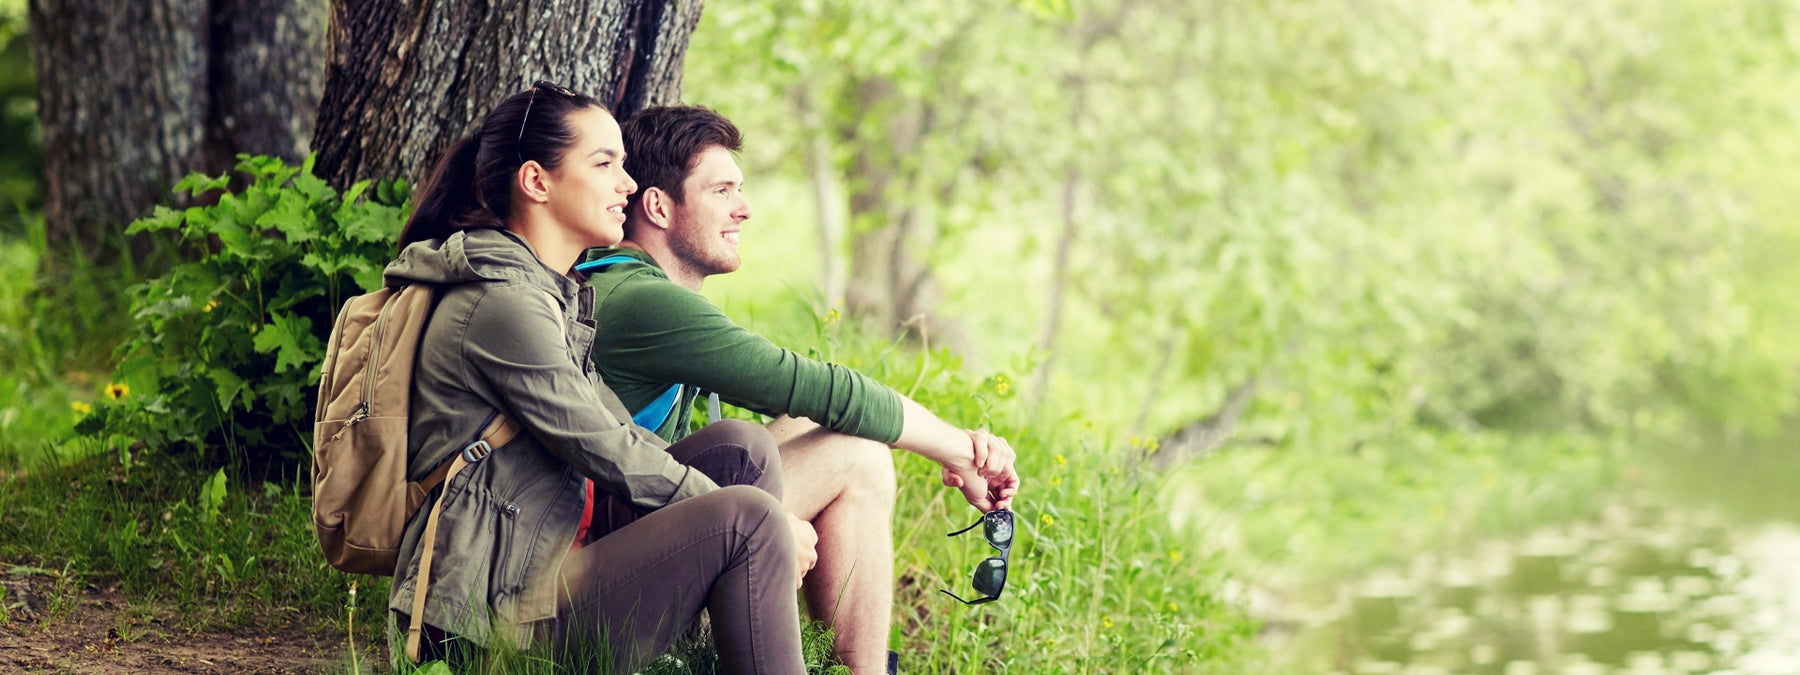 5 Valentine’s Ideas for the Active Couple